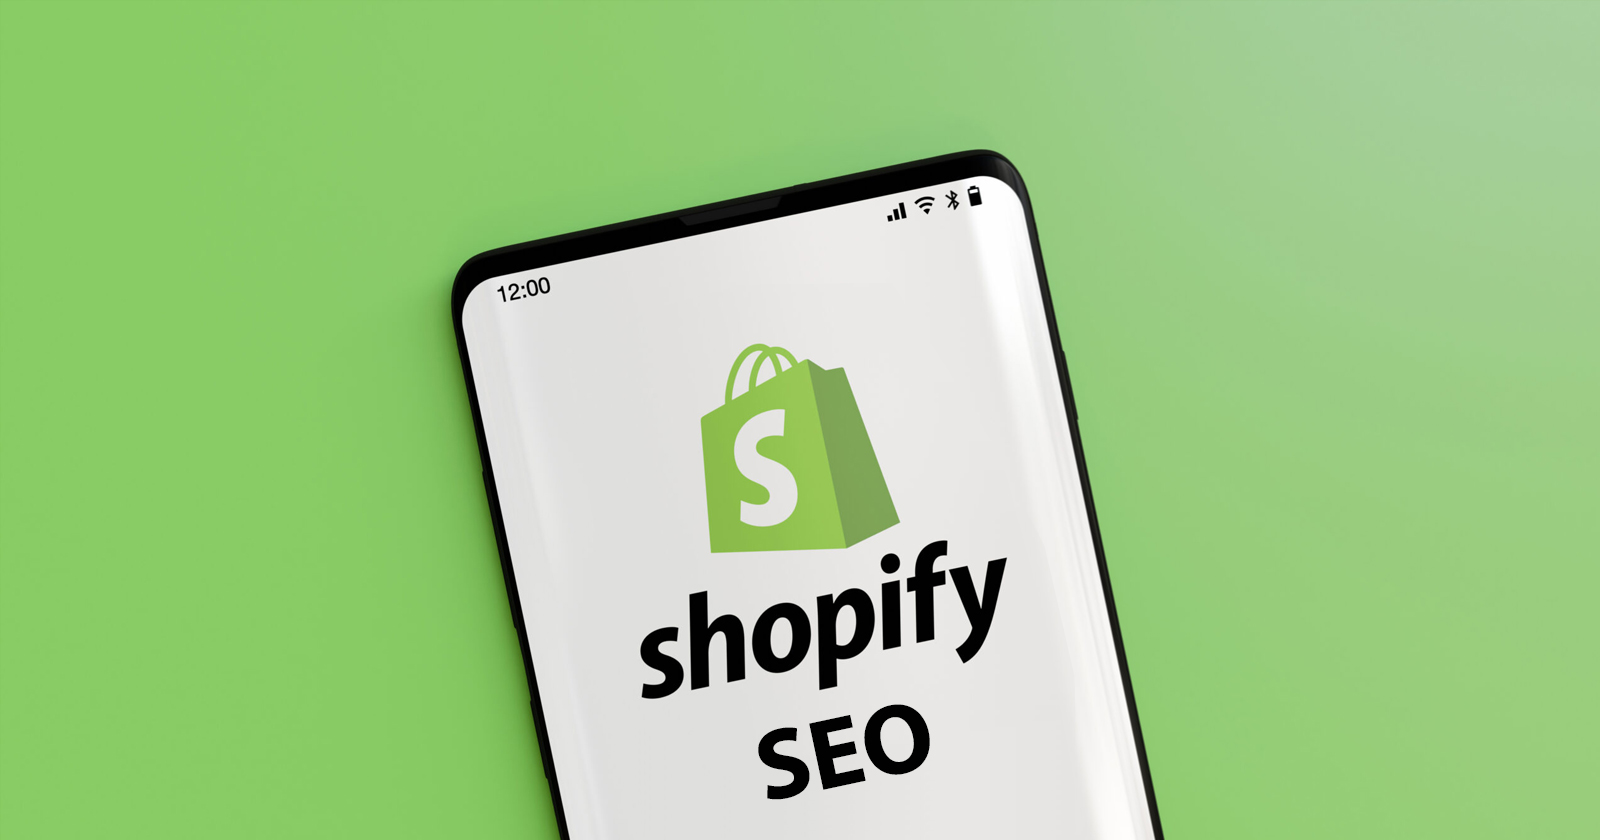 What Is Shopify SEO?